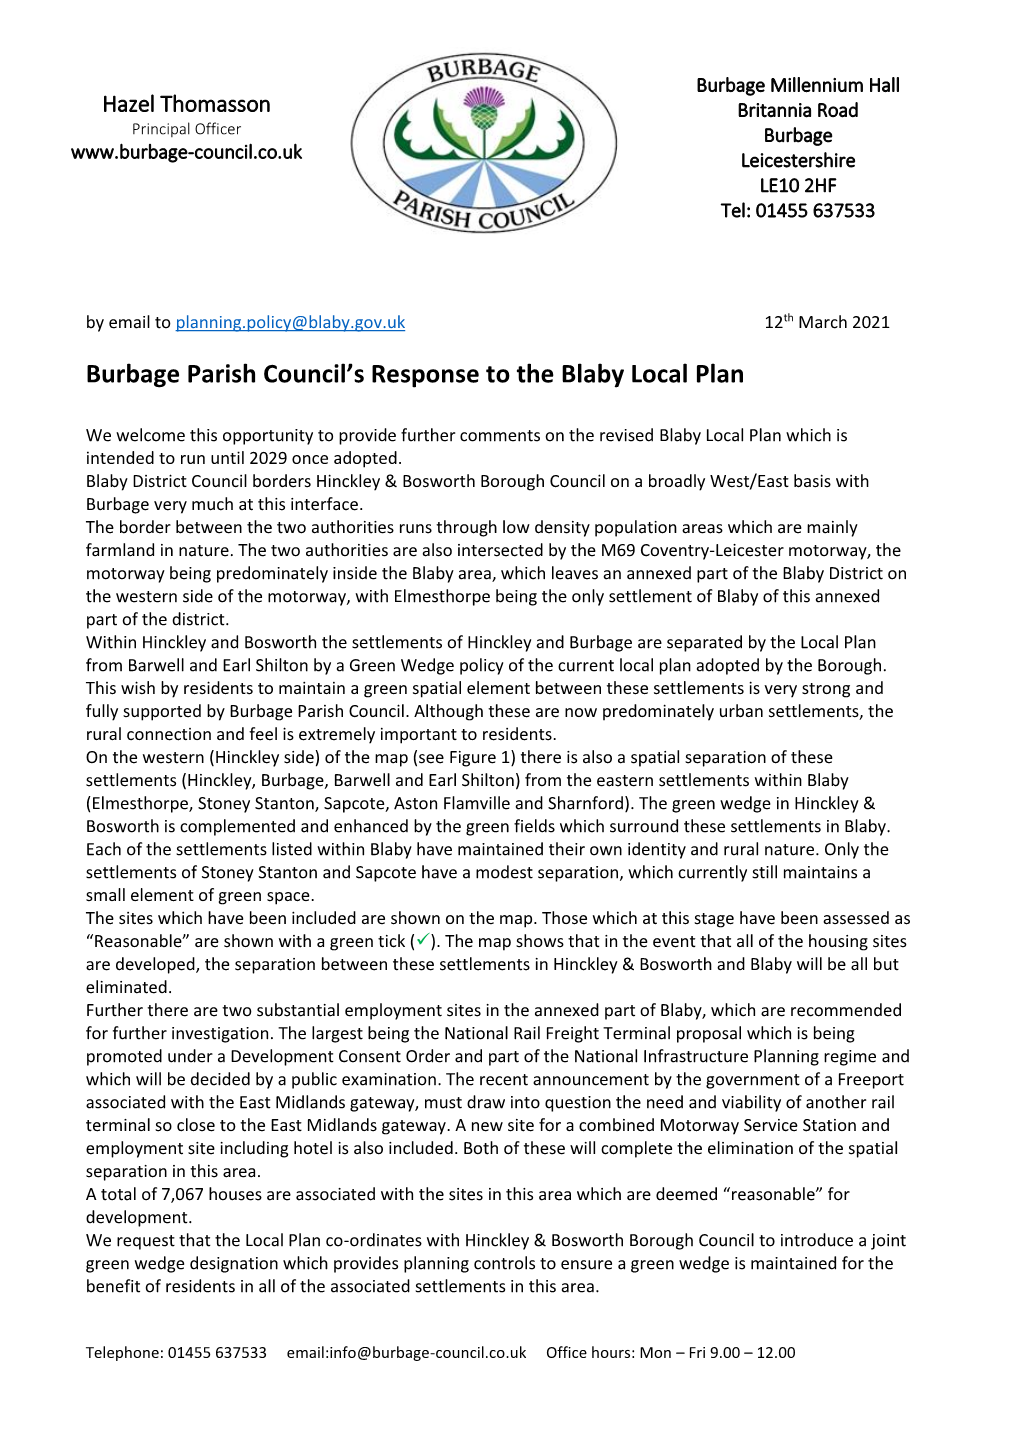 Burbage Parish Council's Response to the Blaby Local Plan